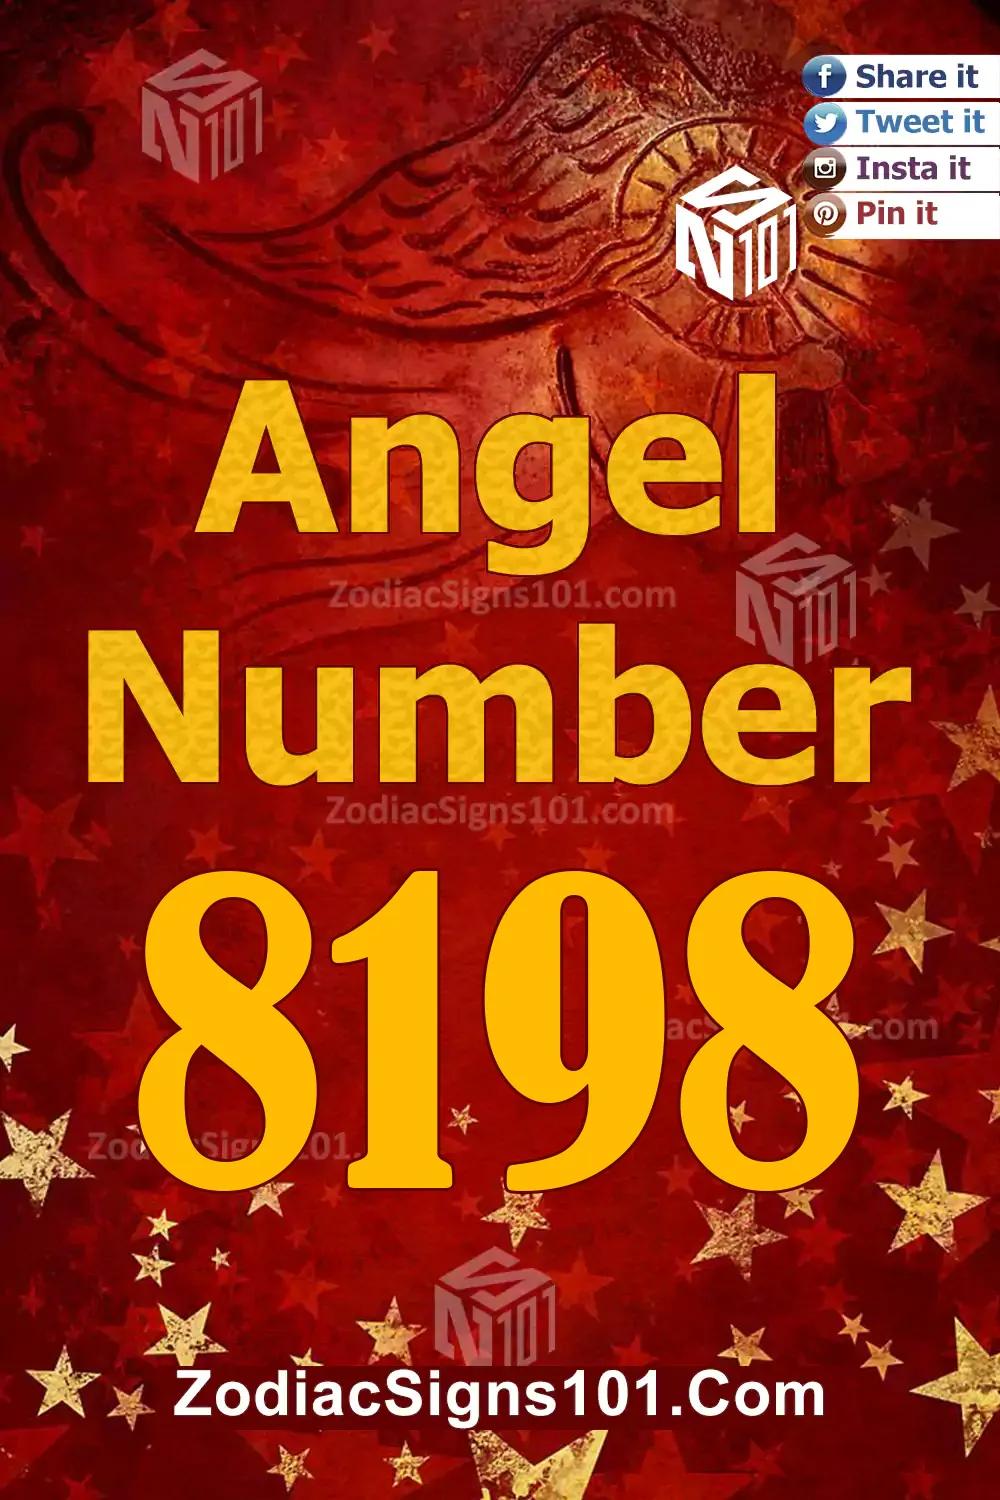 8198 Angel Number Meaning